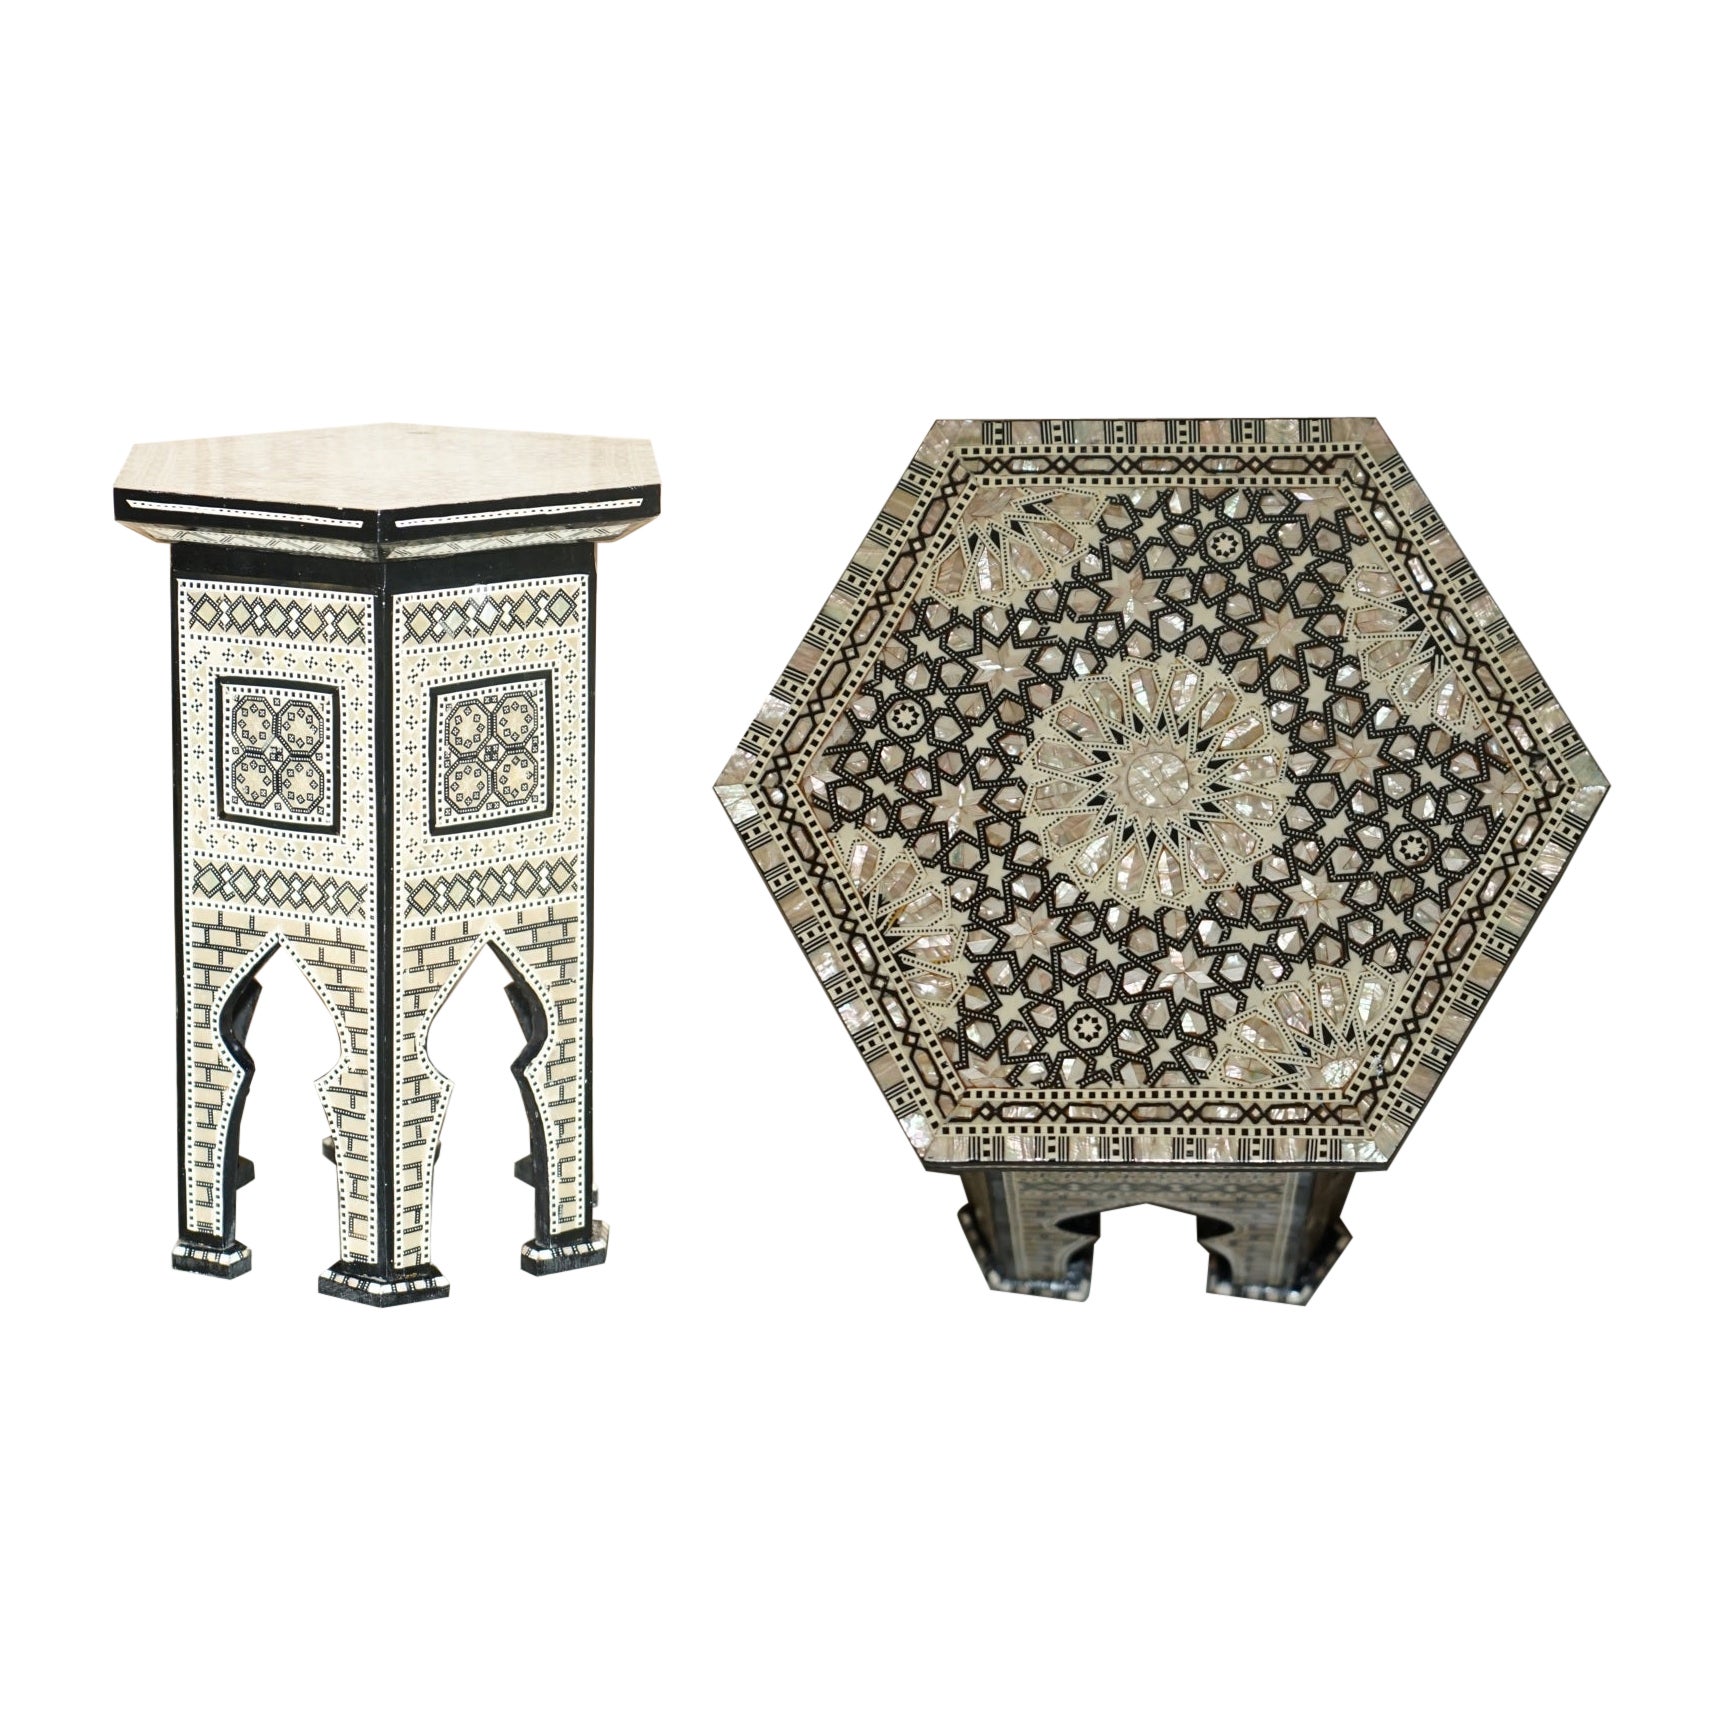 ANTIQUE CIRCA 1900 SYRIAN MOTHER OF PEARL INLAID SiDE TABLE INTERNAL STORAGE